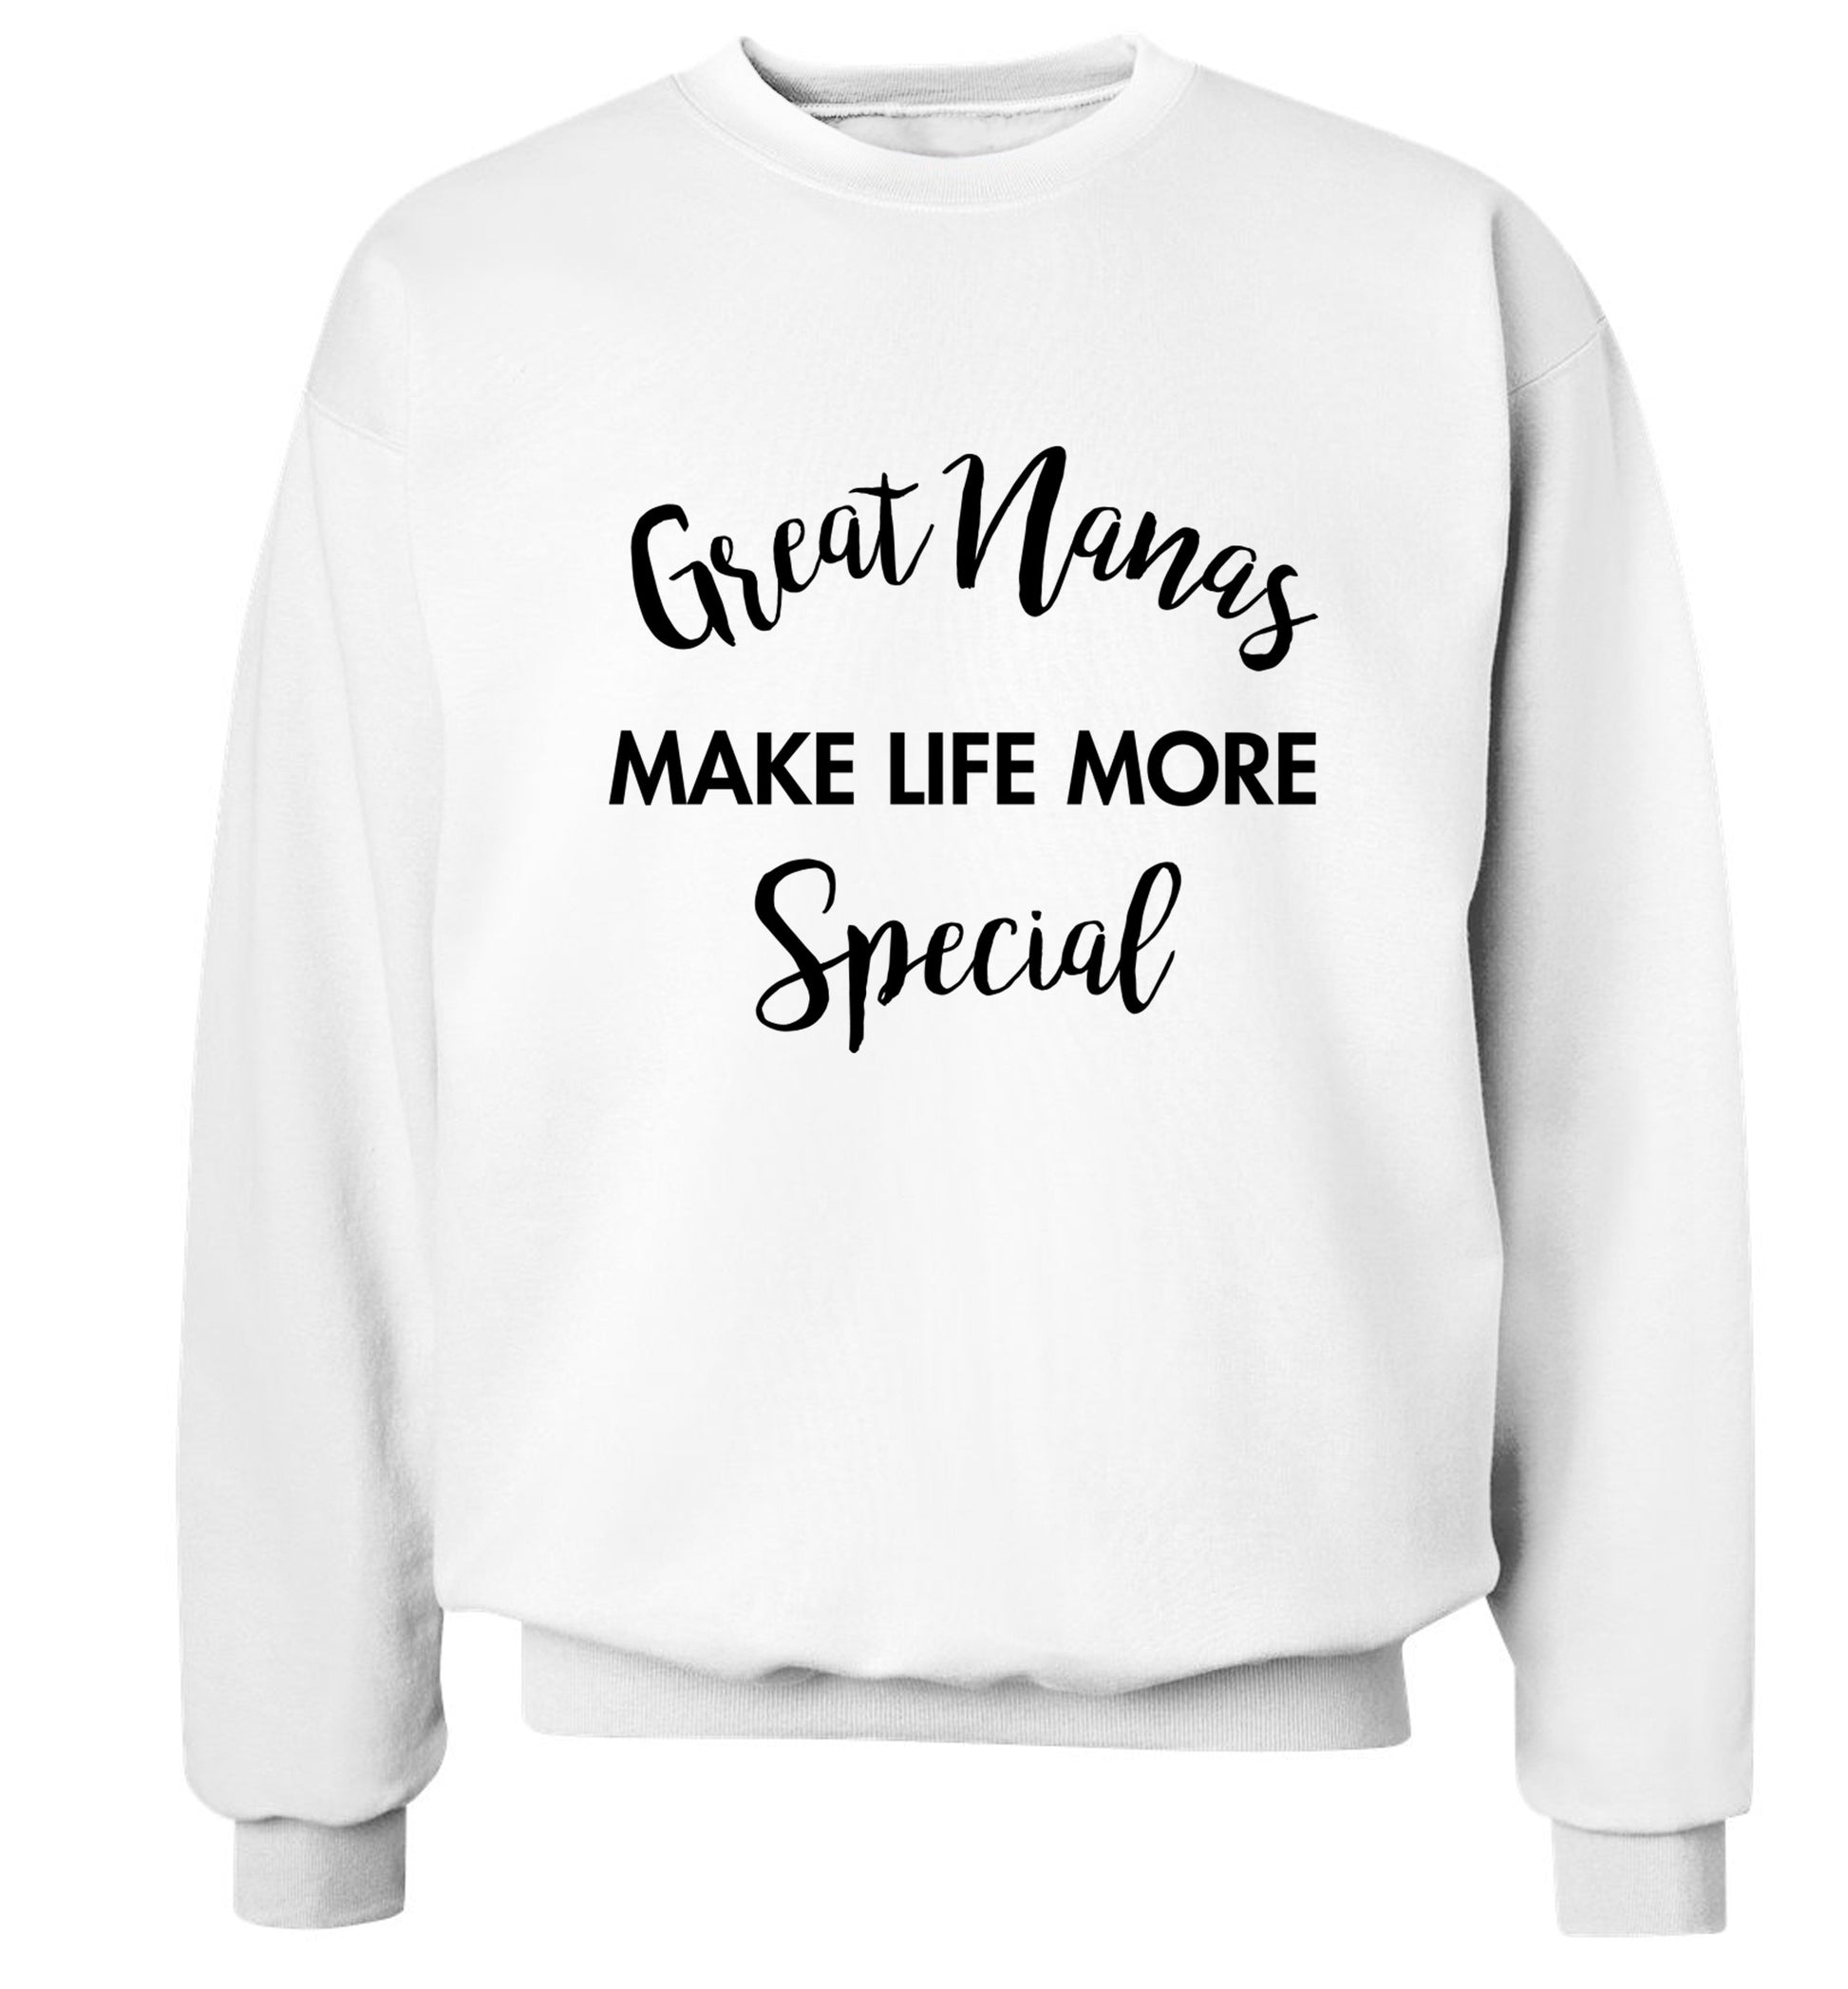 Great nanas make life more special Adult's unisex white Sweater 2XL